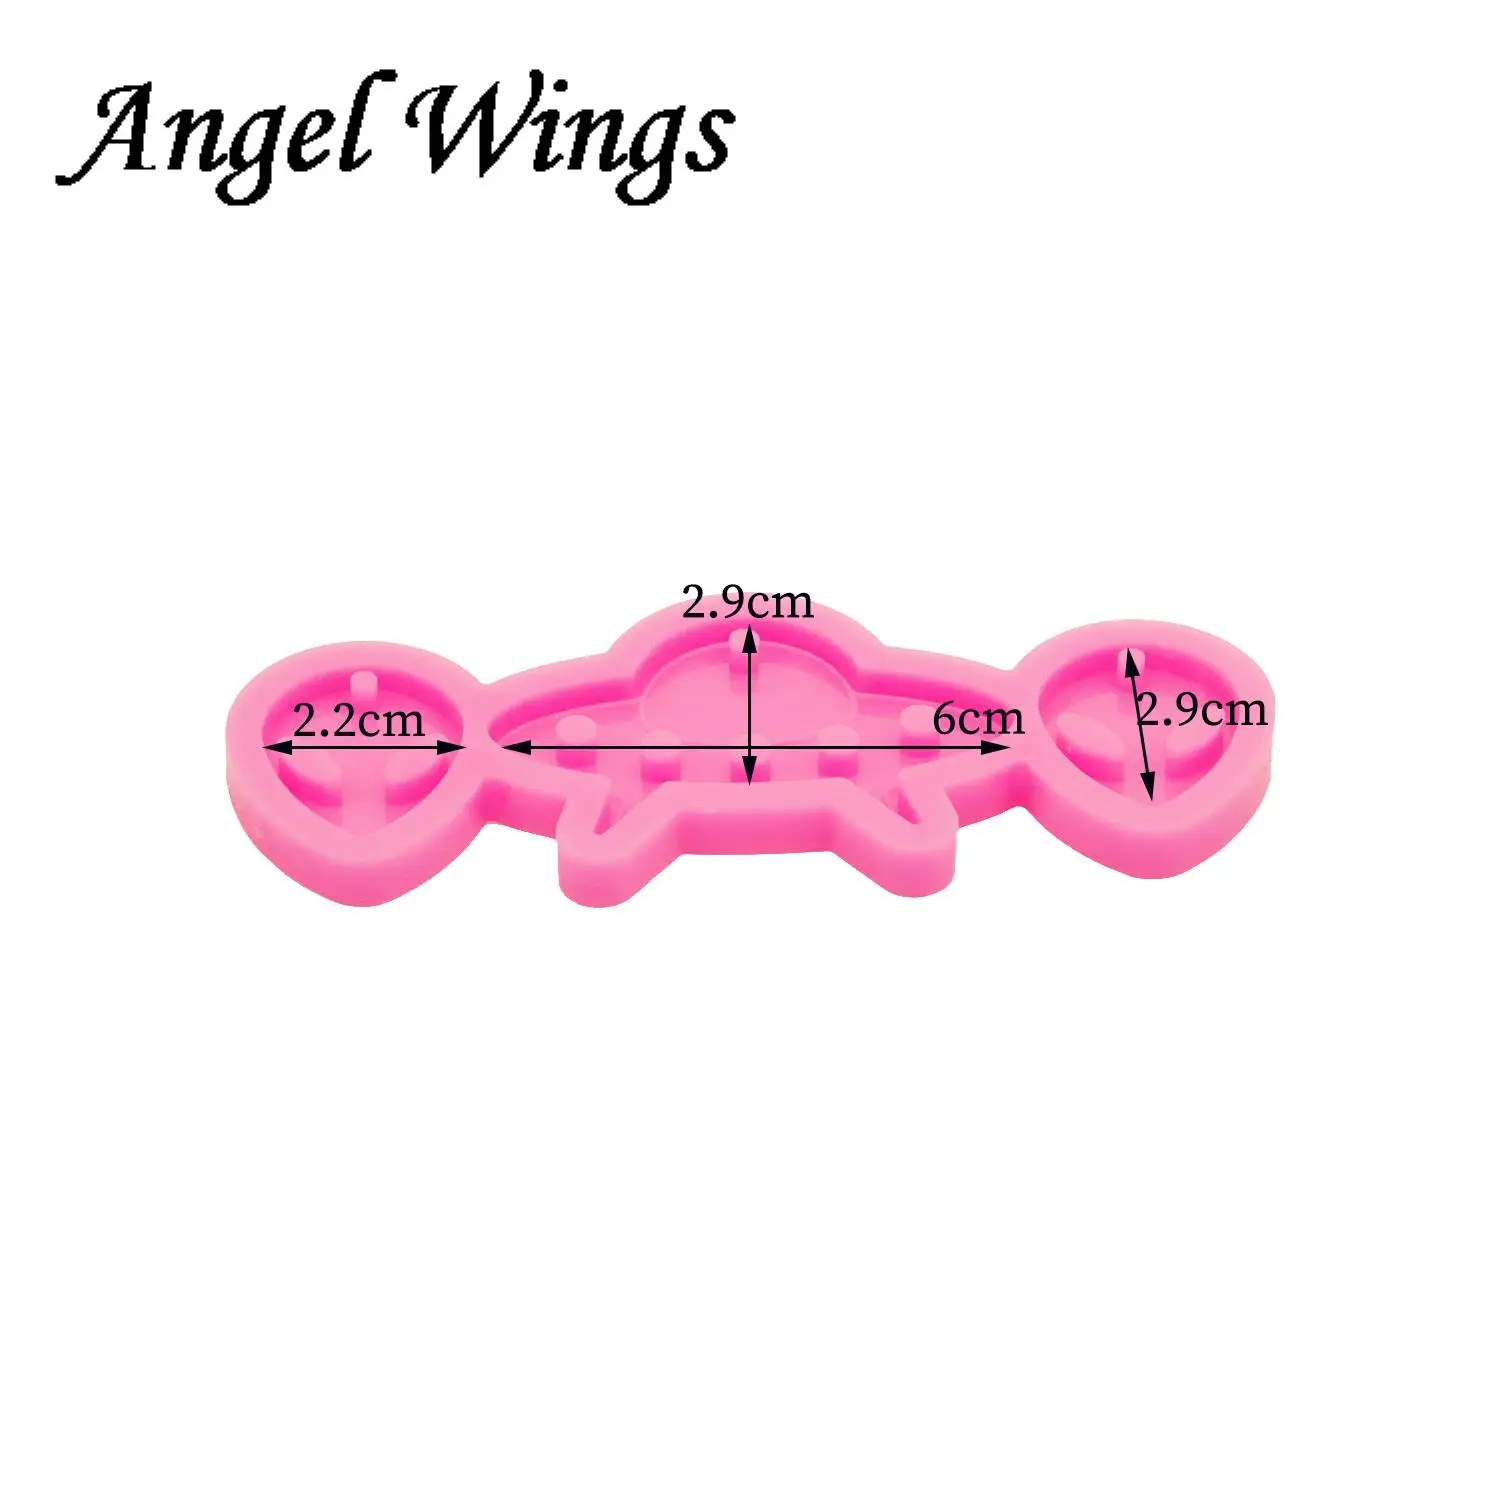 Angel Wings Shiny Glossy Alien-Shape Resin Jewelry Molds Silicone Molds for Epoxy Resin Earring Making Supplies Resin Keychain Mold Clay Molds